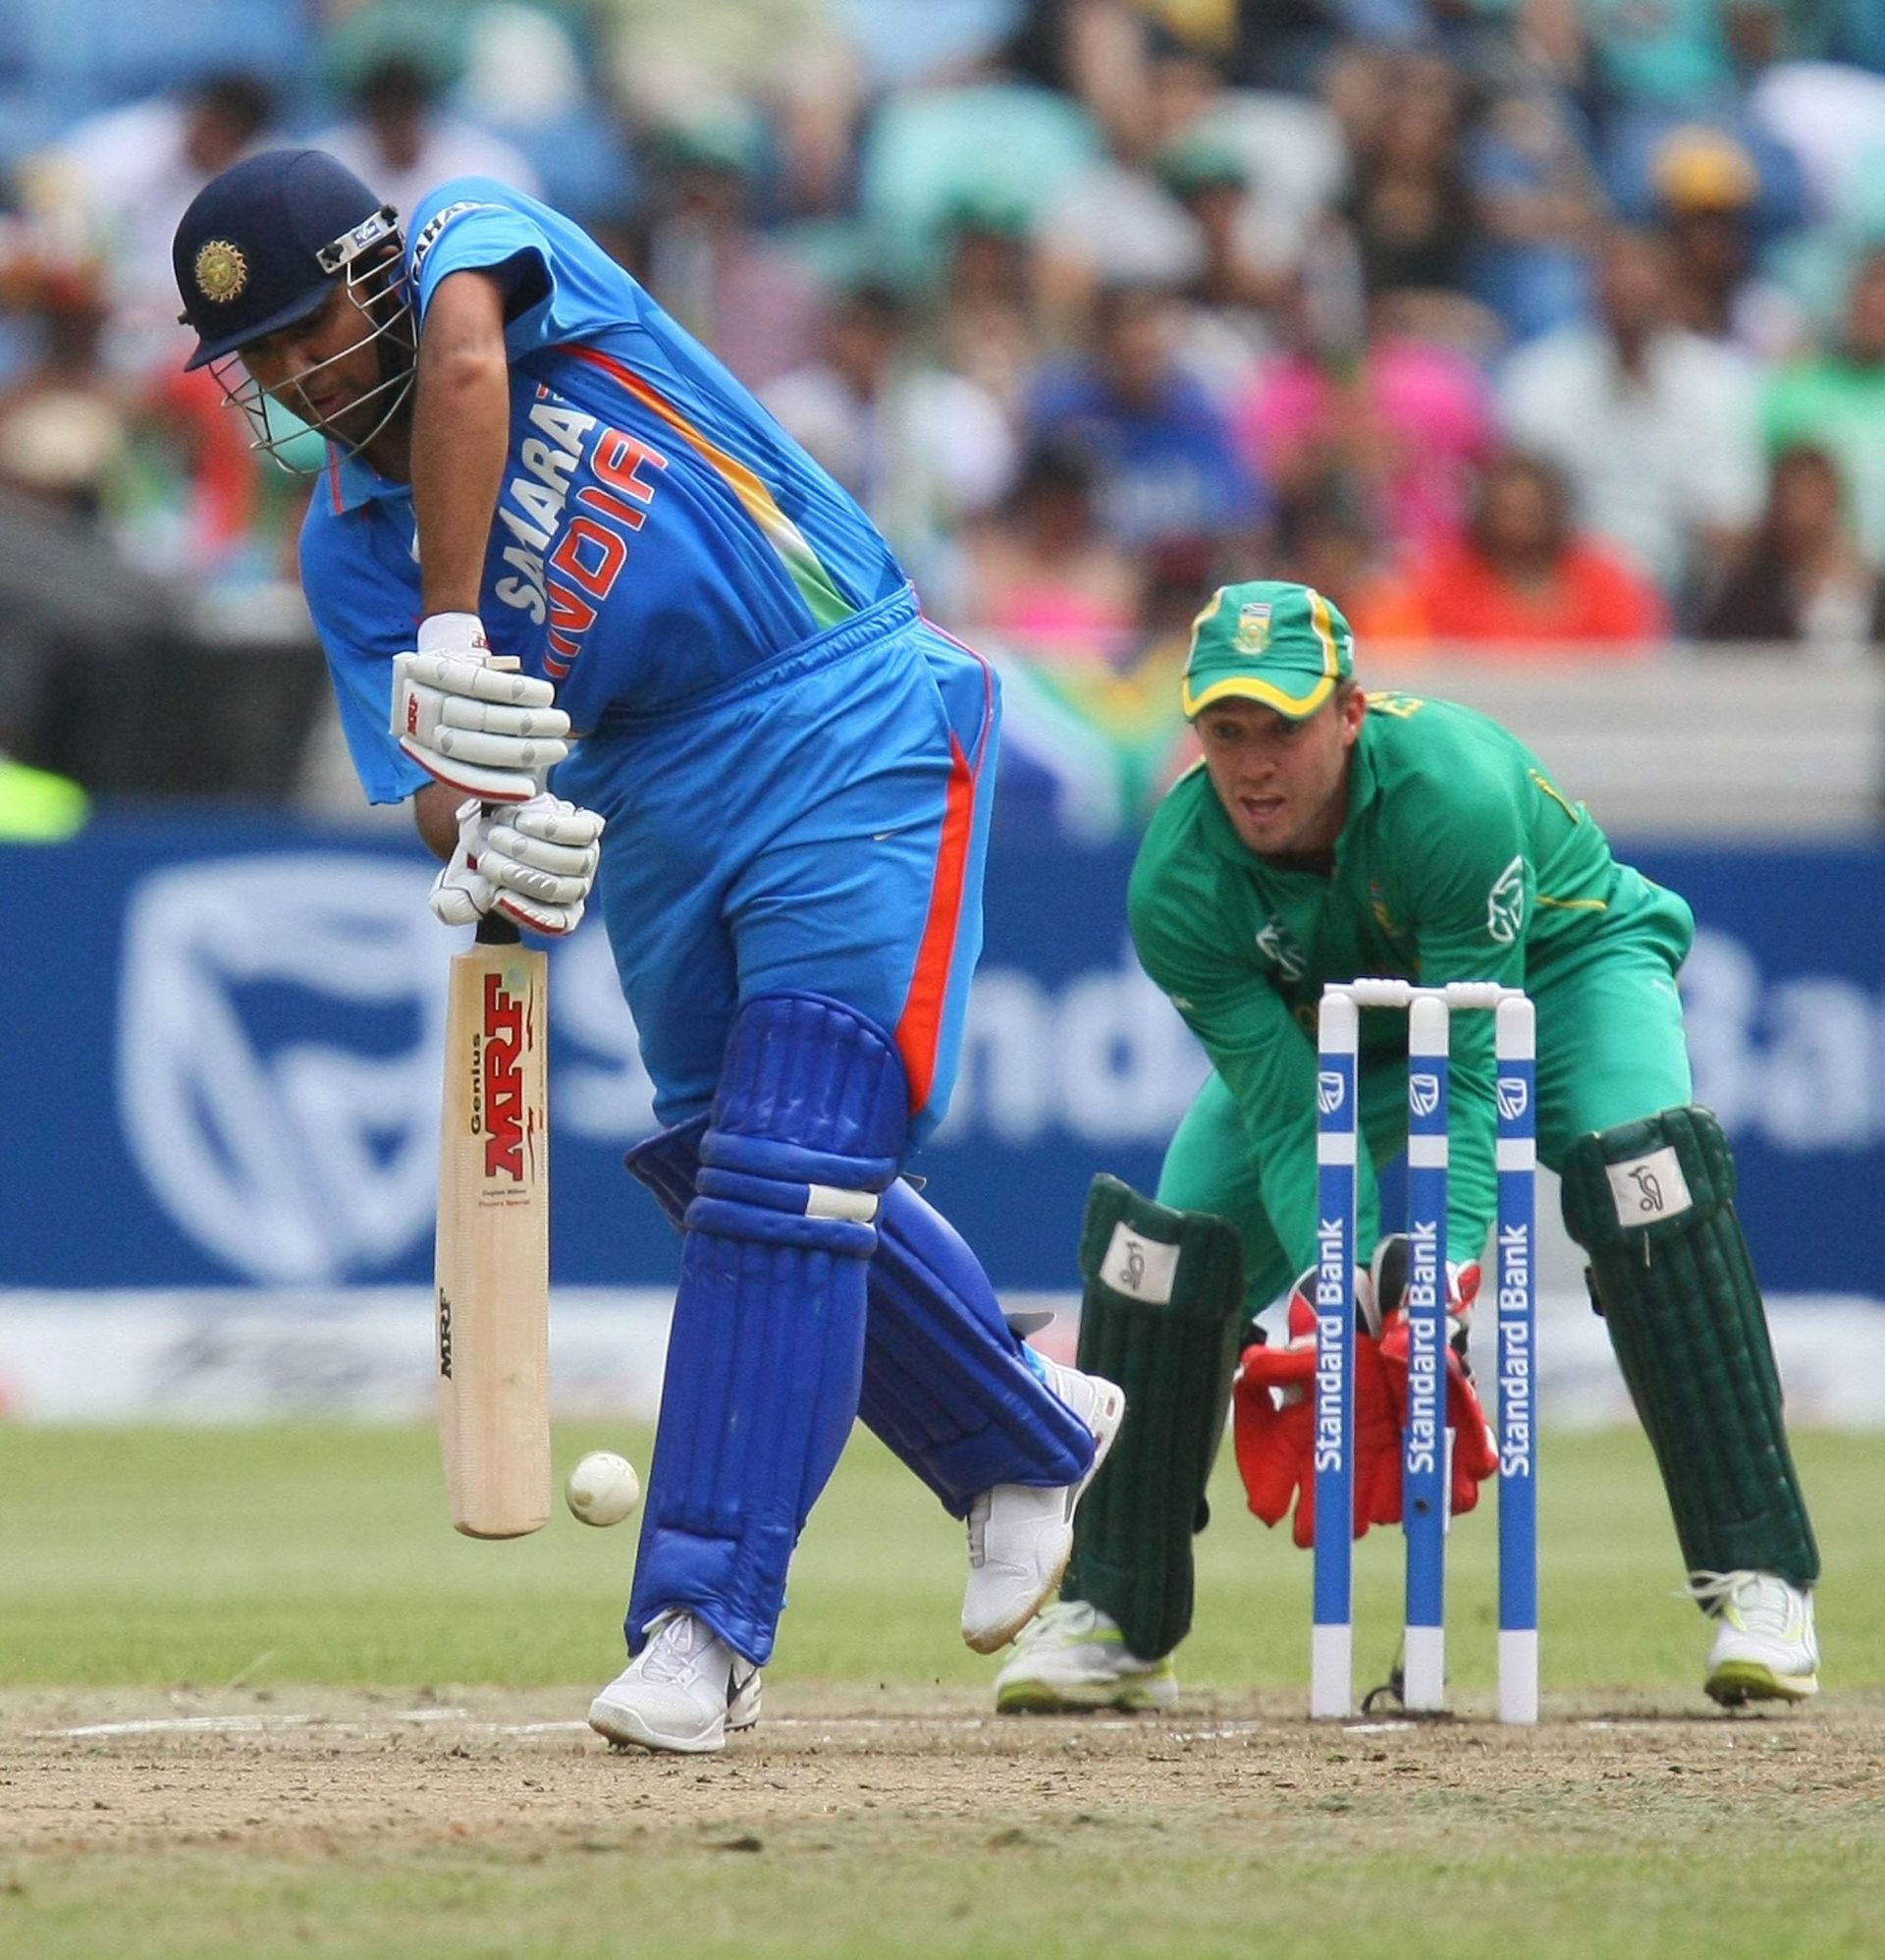 South Africa v India - Standard Bank Pro20 International Rohit Sharma had a memorable 2007 T20 World Cup campaign.